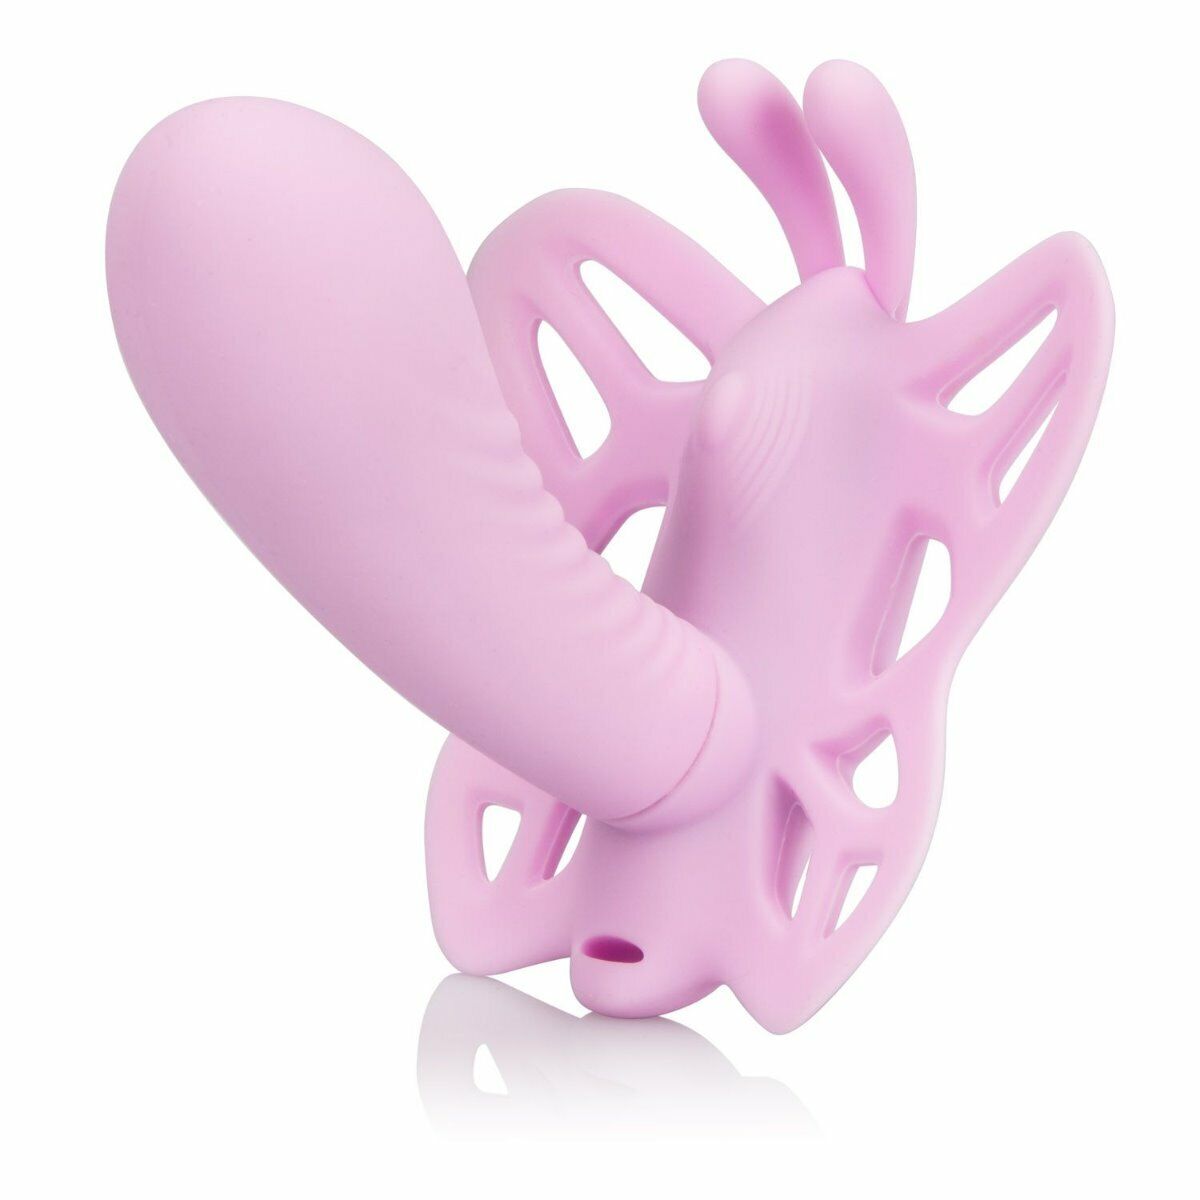 Wireless Remote Control Venus Butterfly G-spot Vibrator Sex-toy for Women